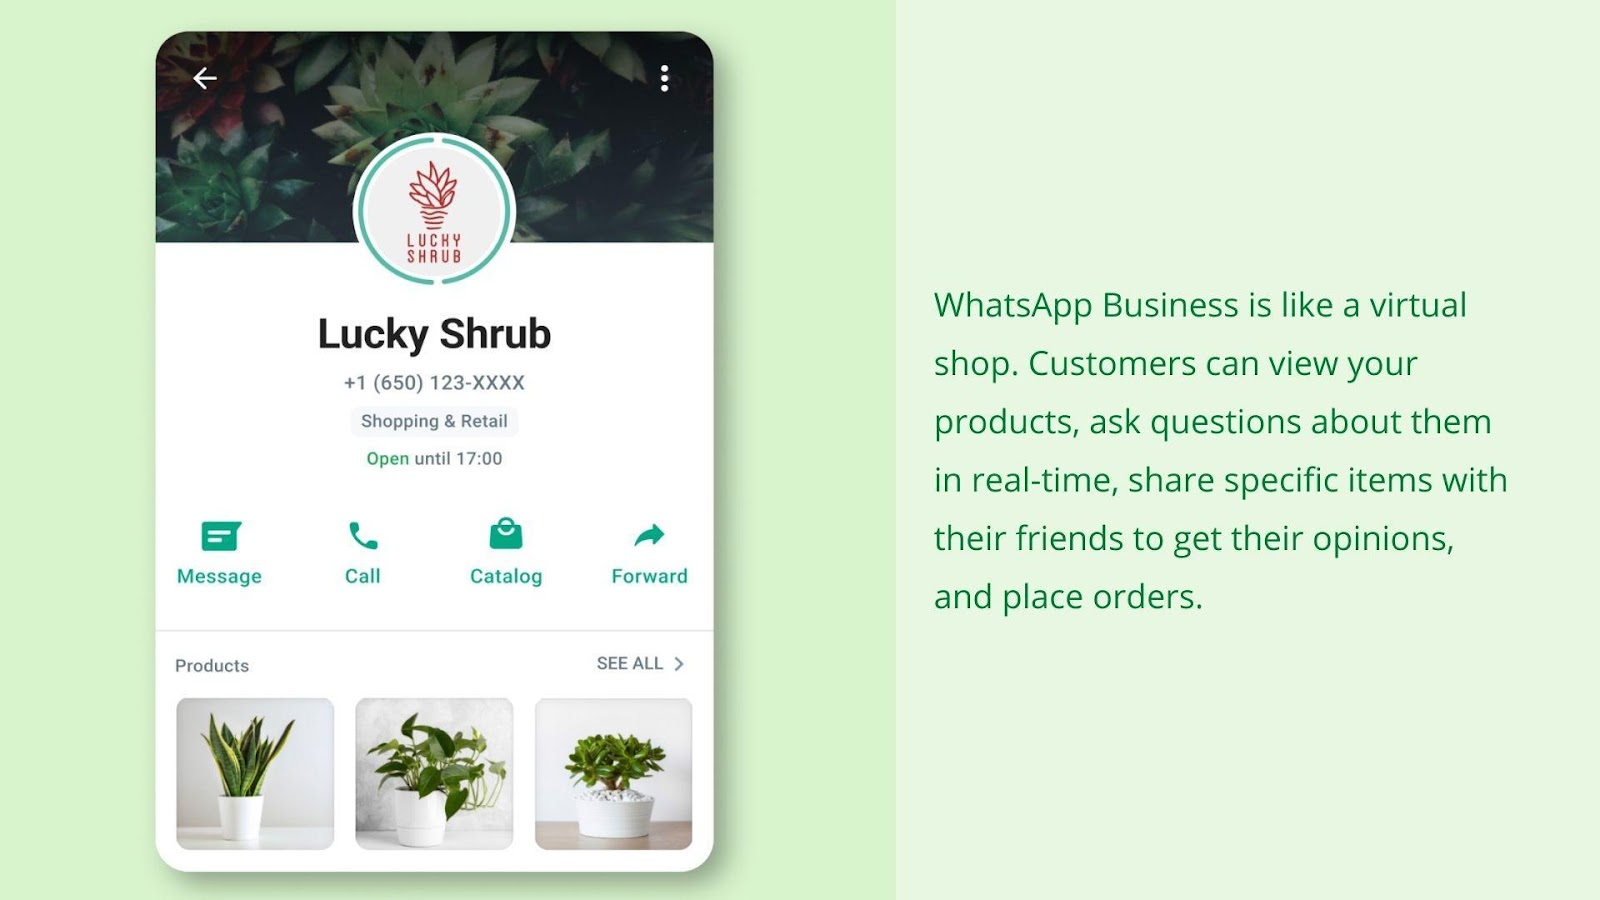 Screenshot of a company’s WhatsApp Business profile, accompanied by the paragraph: “WhatsApp Business is like a virtual shop. Customers can view your products, ask questions about them in real-time, share specific items with their friends to get their opinions, and place orders.”